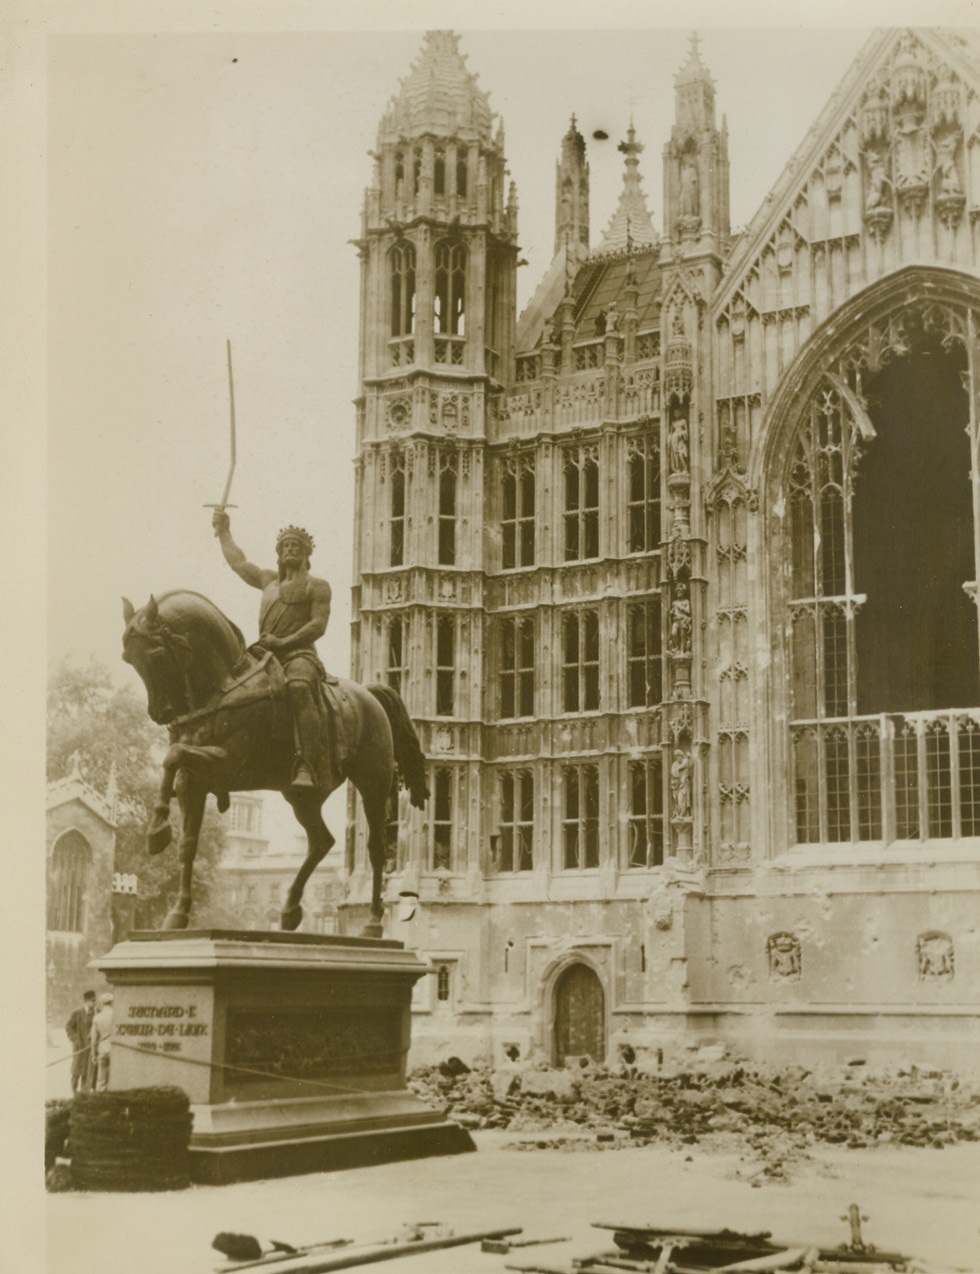 Richard Still Rides, 10/18/1940  LONDON -- When a bomb burst near the Houses of Parliament during a recent German air raid, the bronze statue of Richard I (Richard Coeur De Lion) escaped with but a bent sword. Note damage done to the building in background. Credit: (ACME);